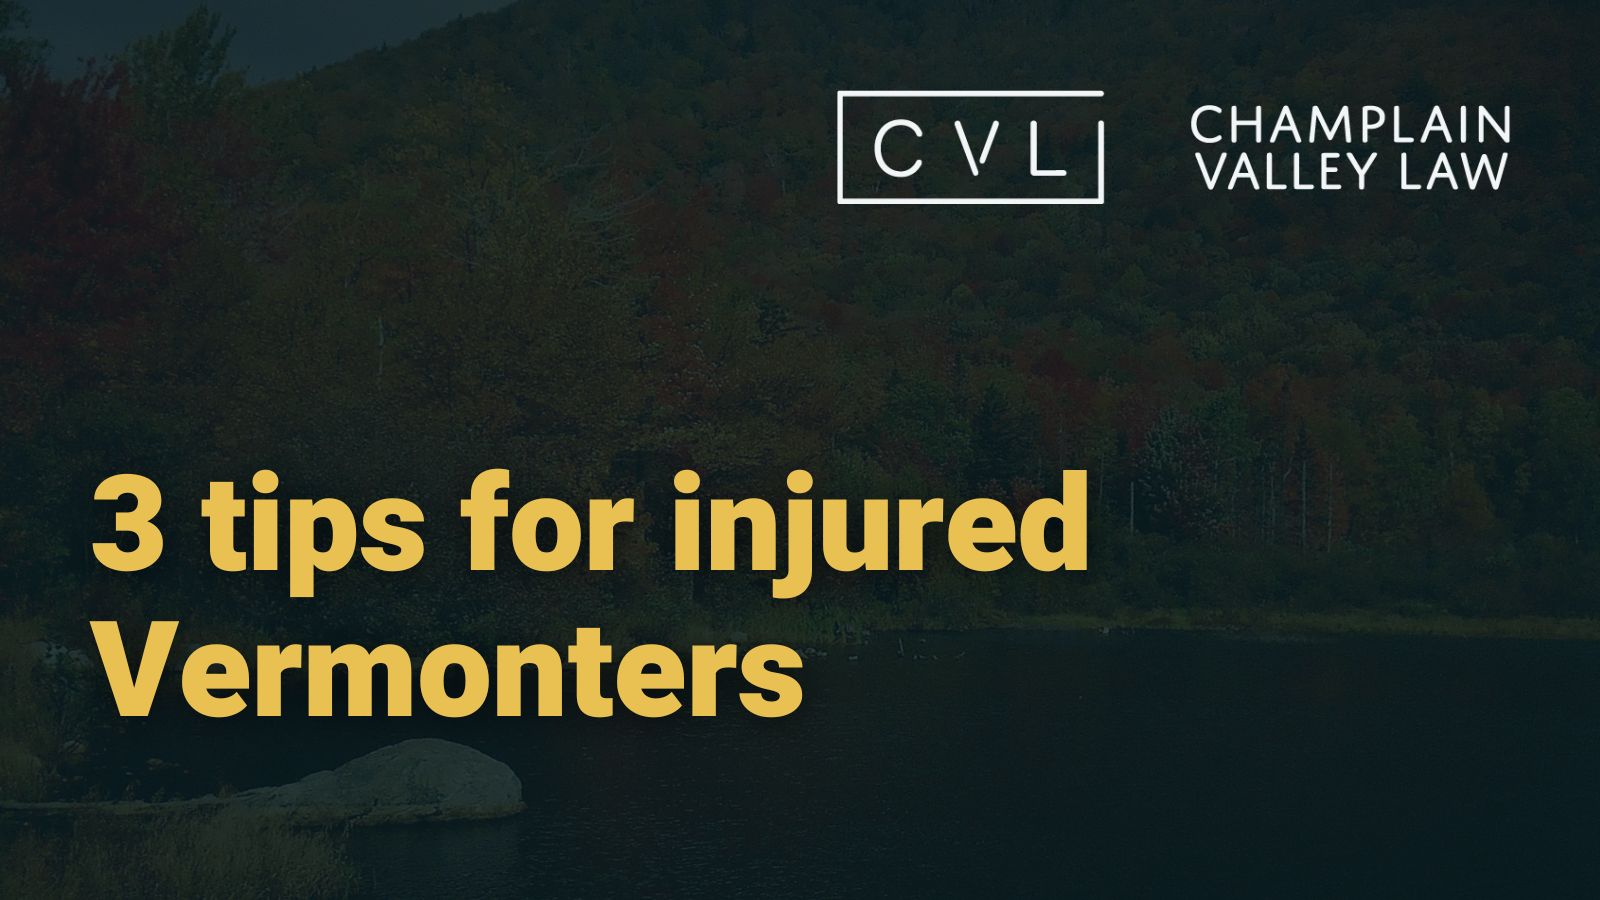 3 Tips for Injured Vermonters